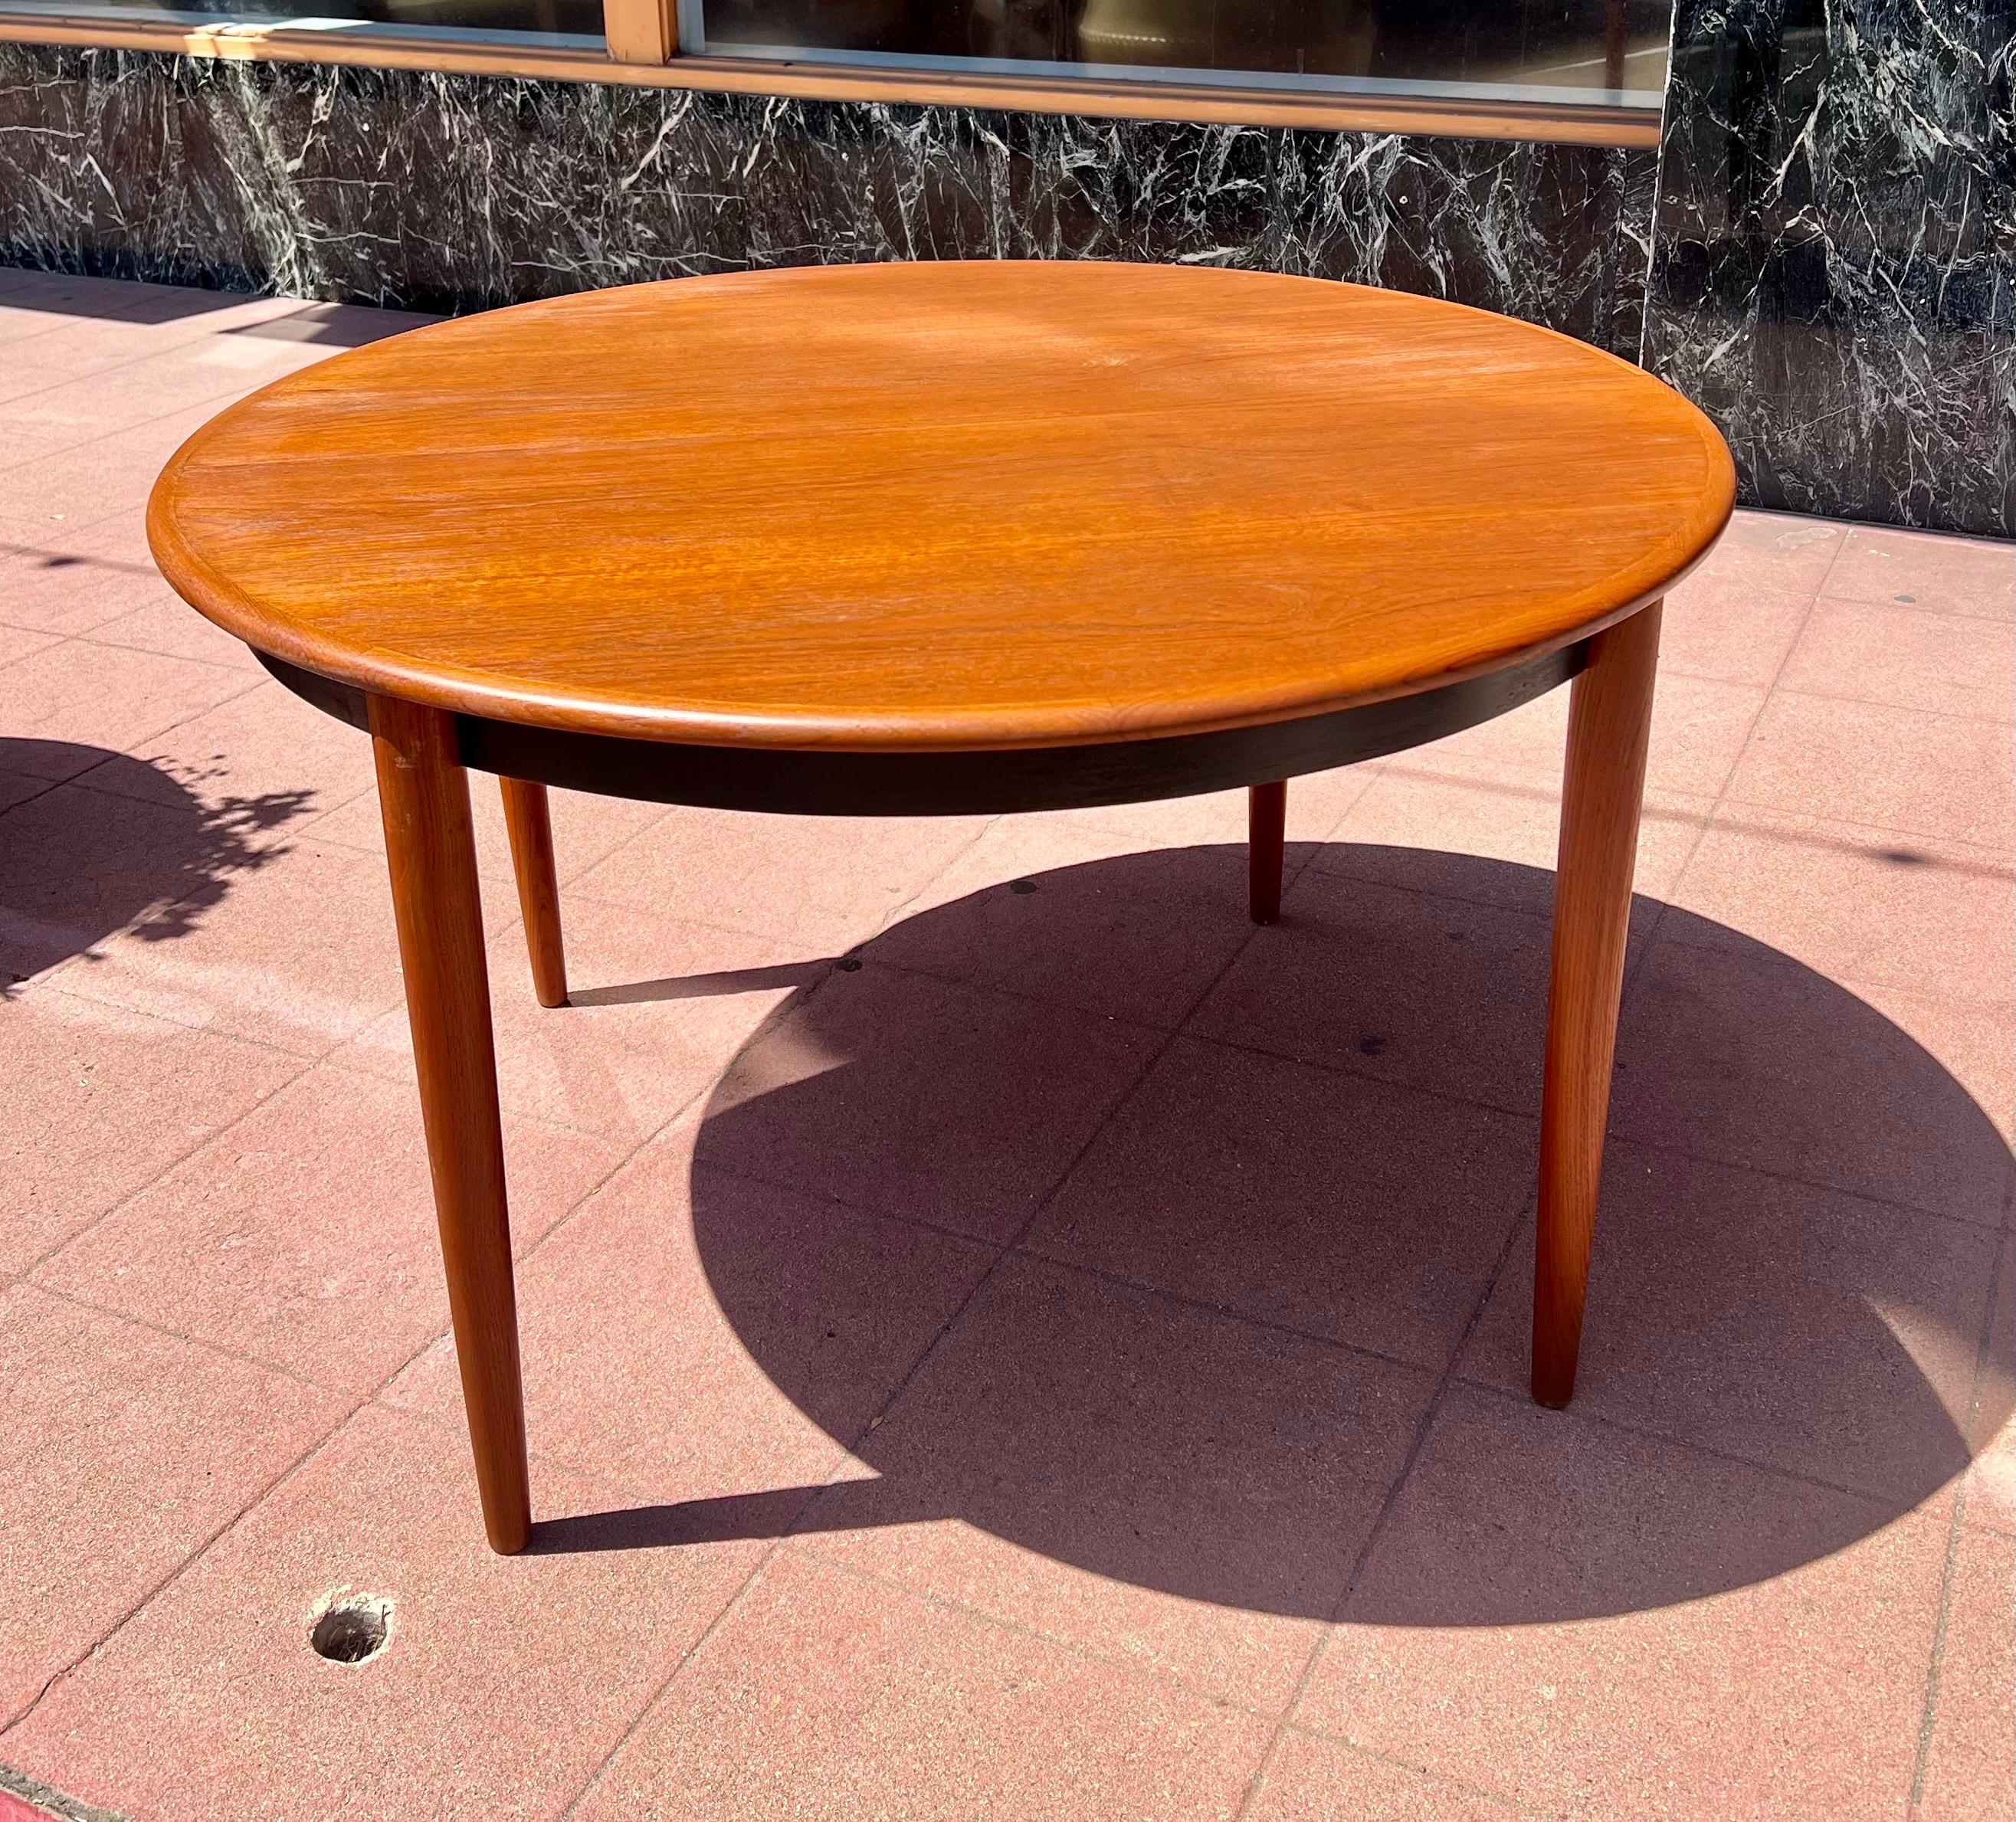 20th Century Danish Modern Teak Round/Oval Dining Table Refinished